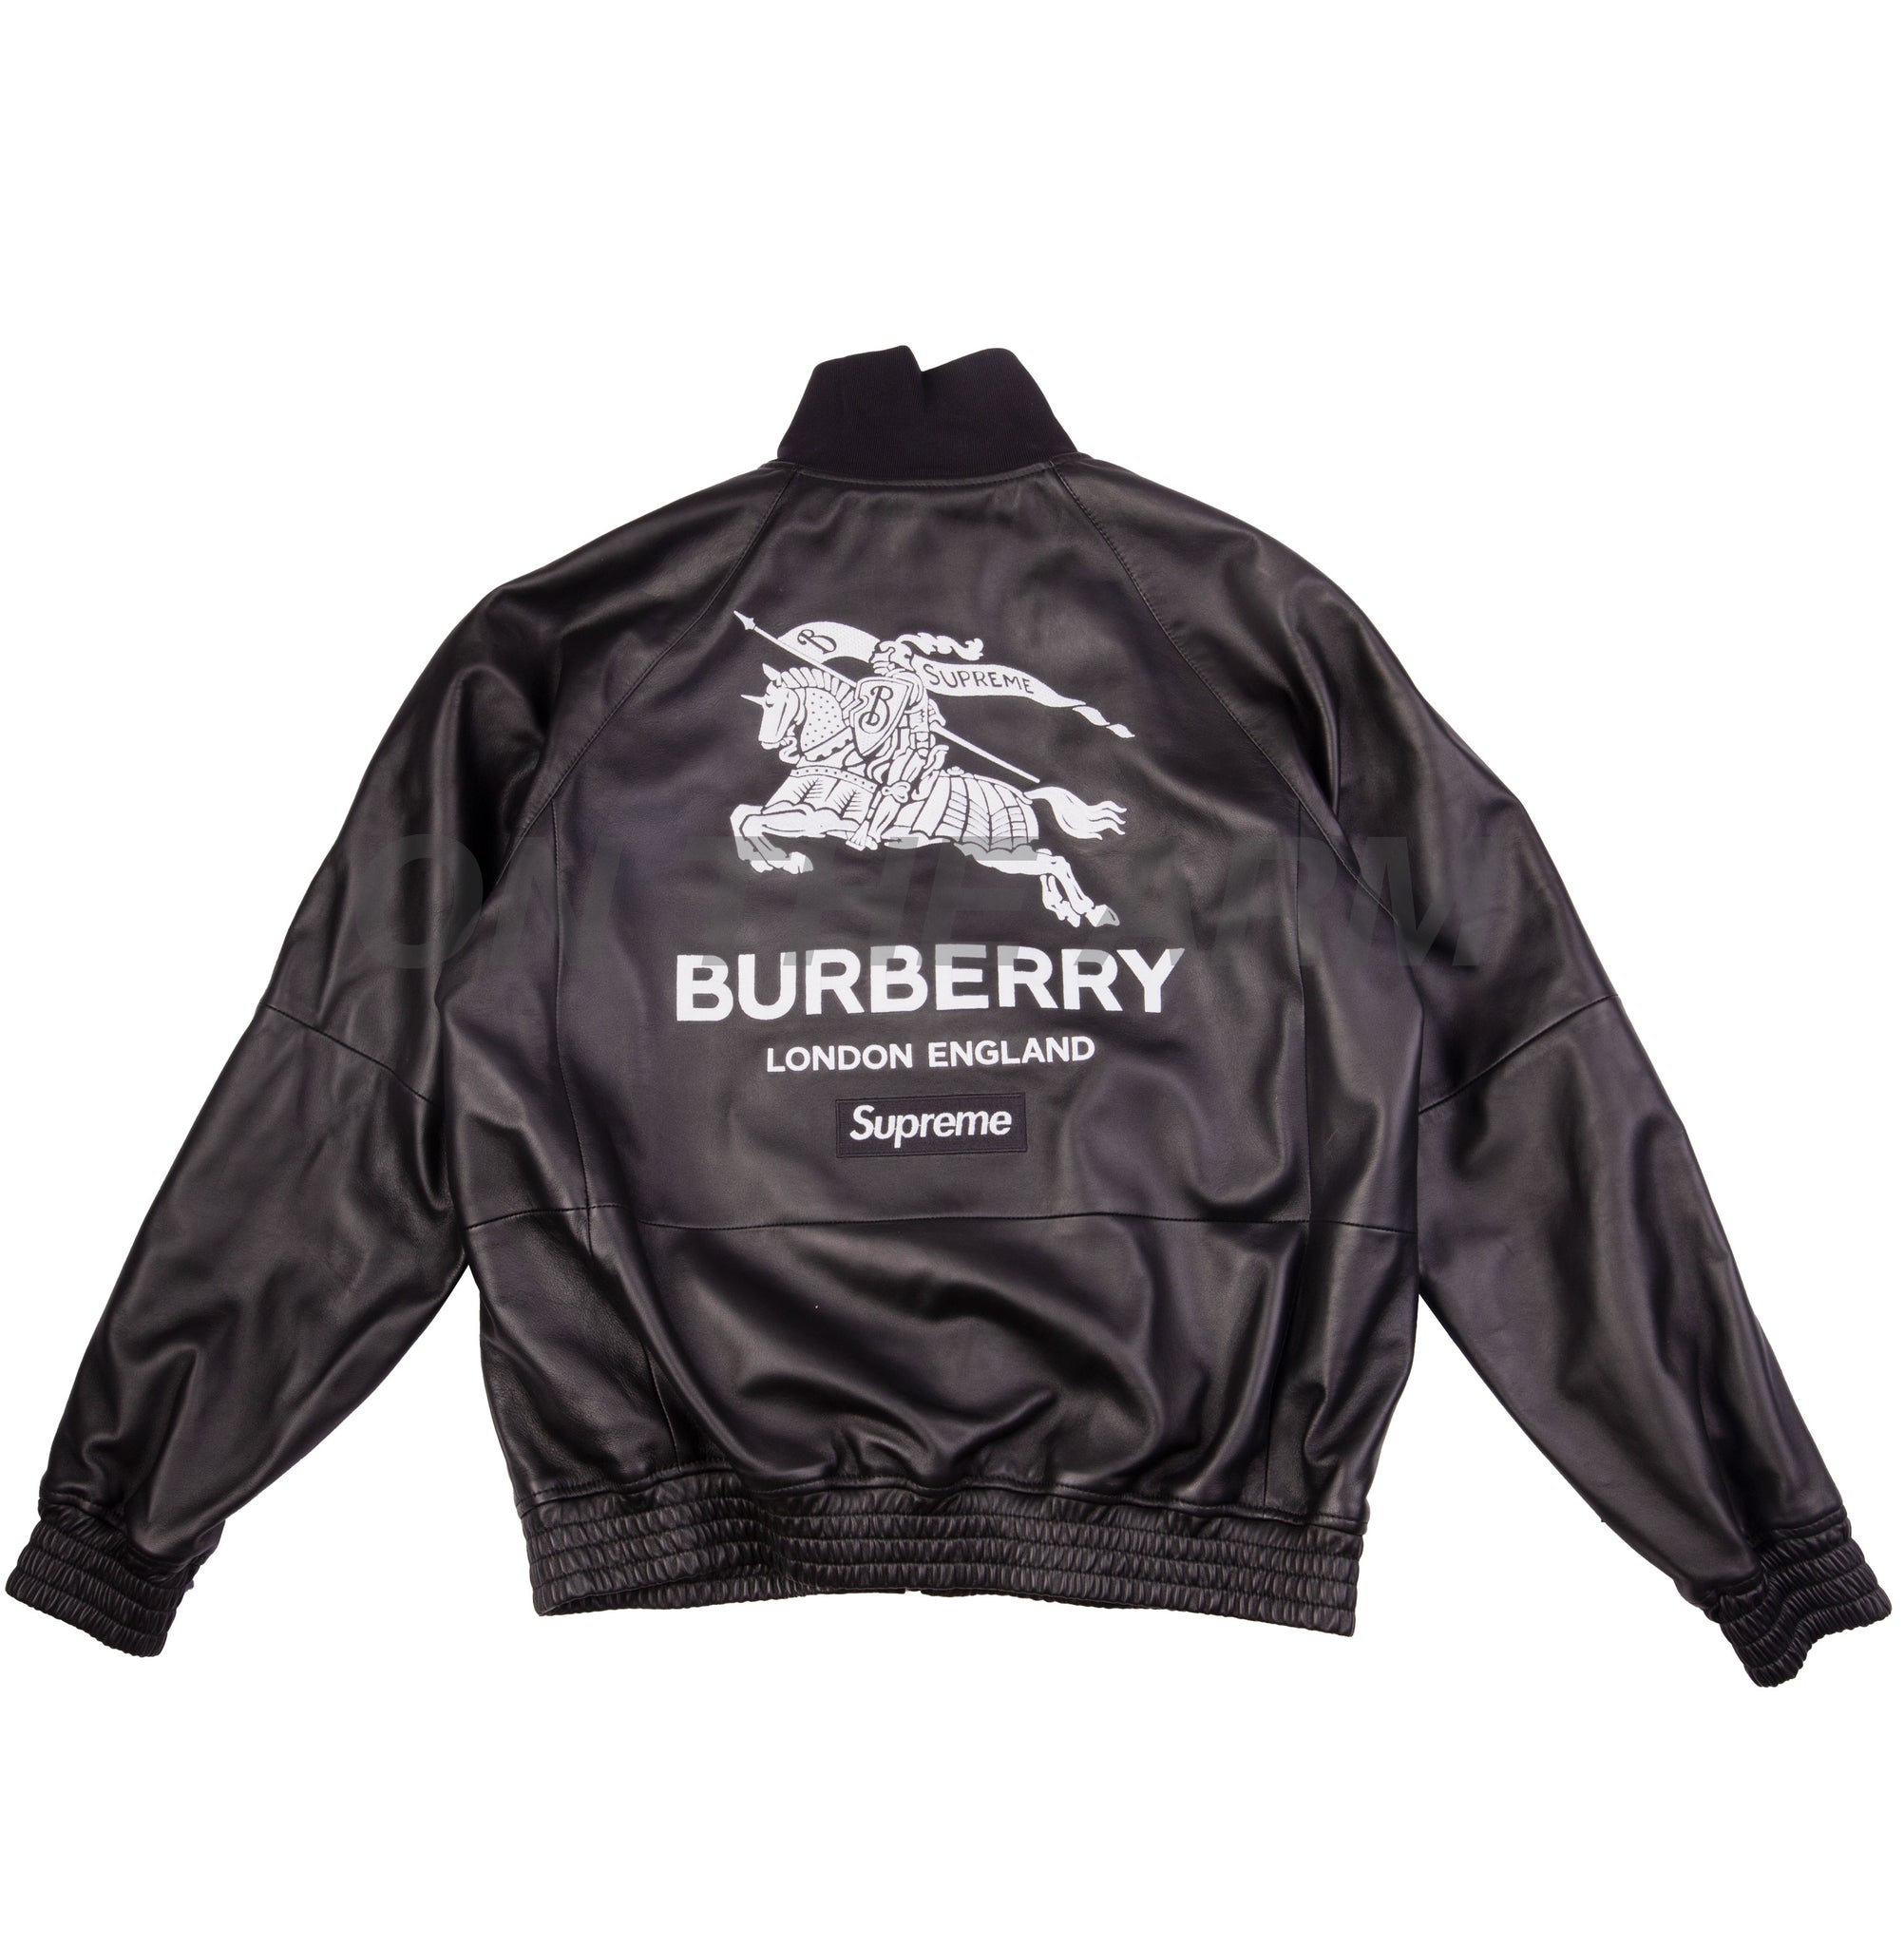 Supreme Black Burberry Leather Jacket – On The Arm